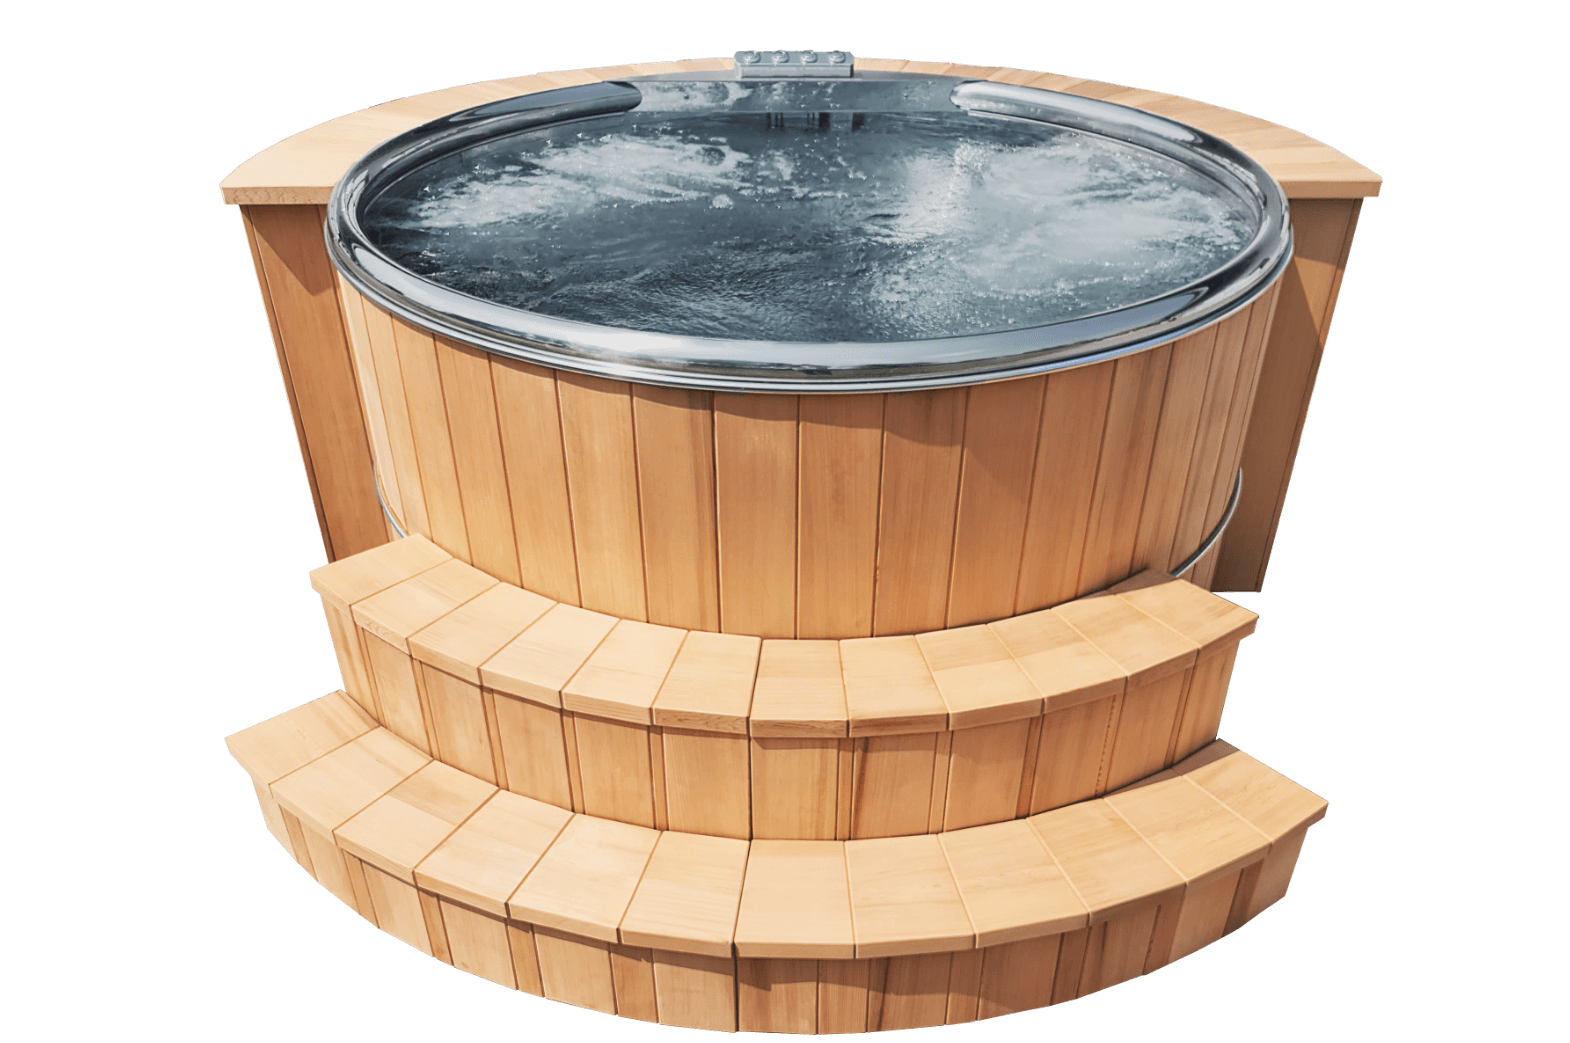 environmentally friendly product, eco friendly hot tub, Professional filtration